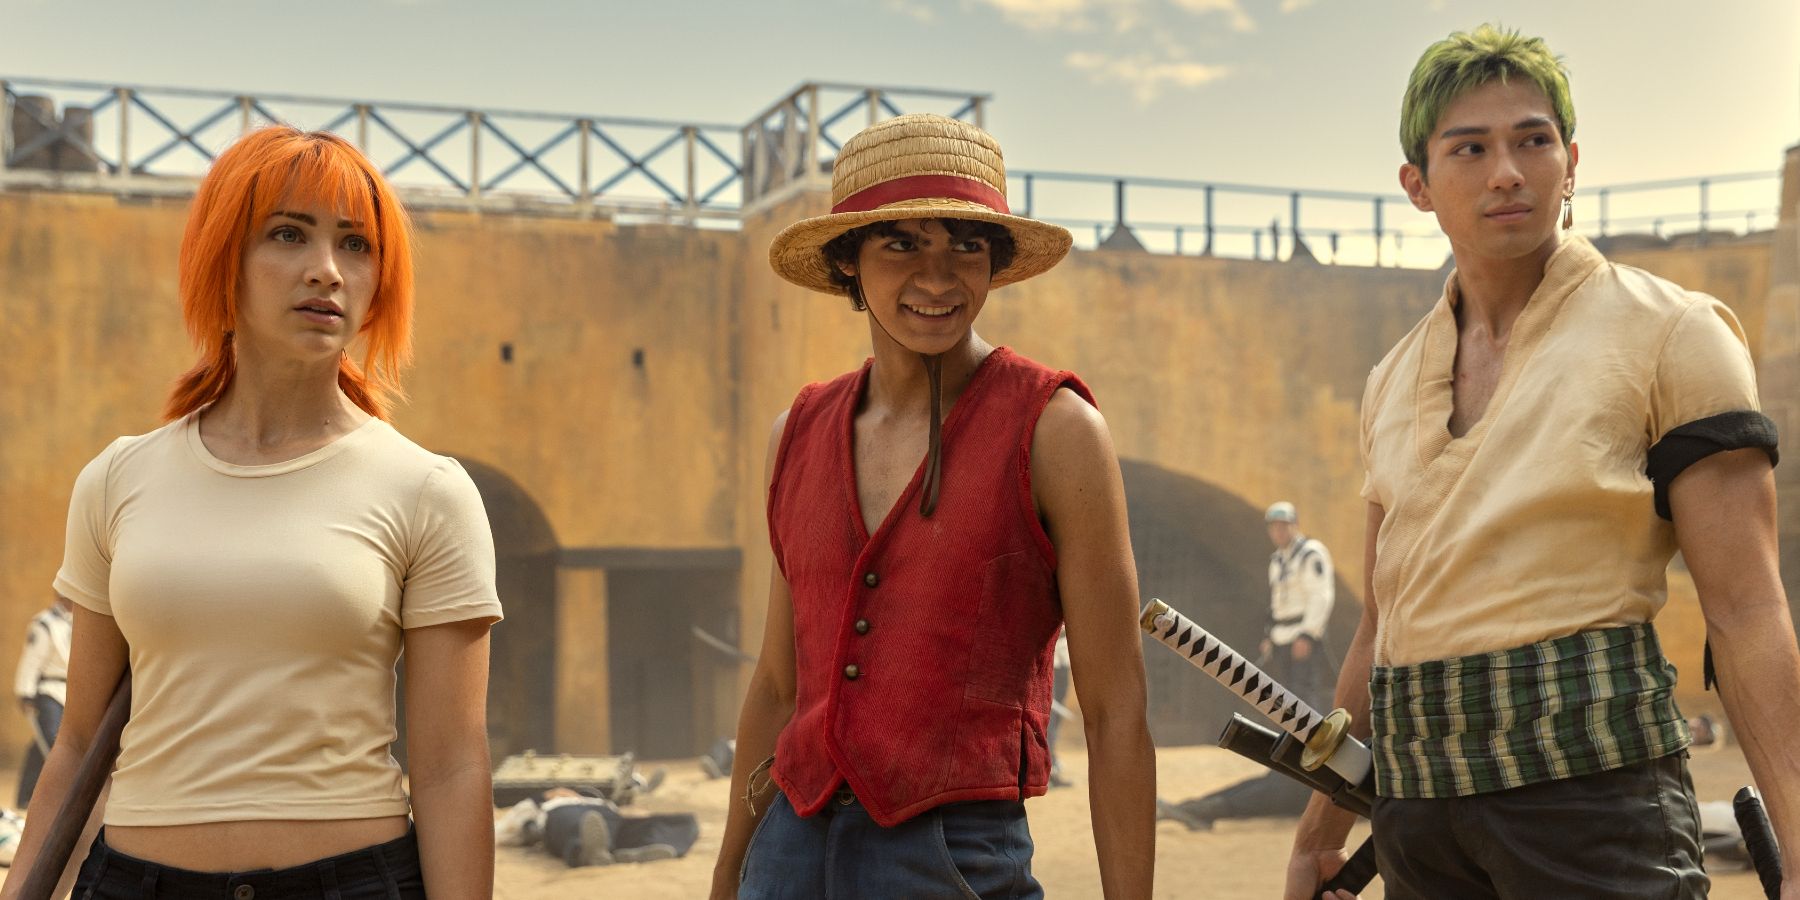  Iñaki Godoy, Emily Rudd, and Mackenyu as Luffy, Nami, and Zoro standing together in One Piece live action